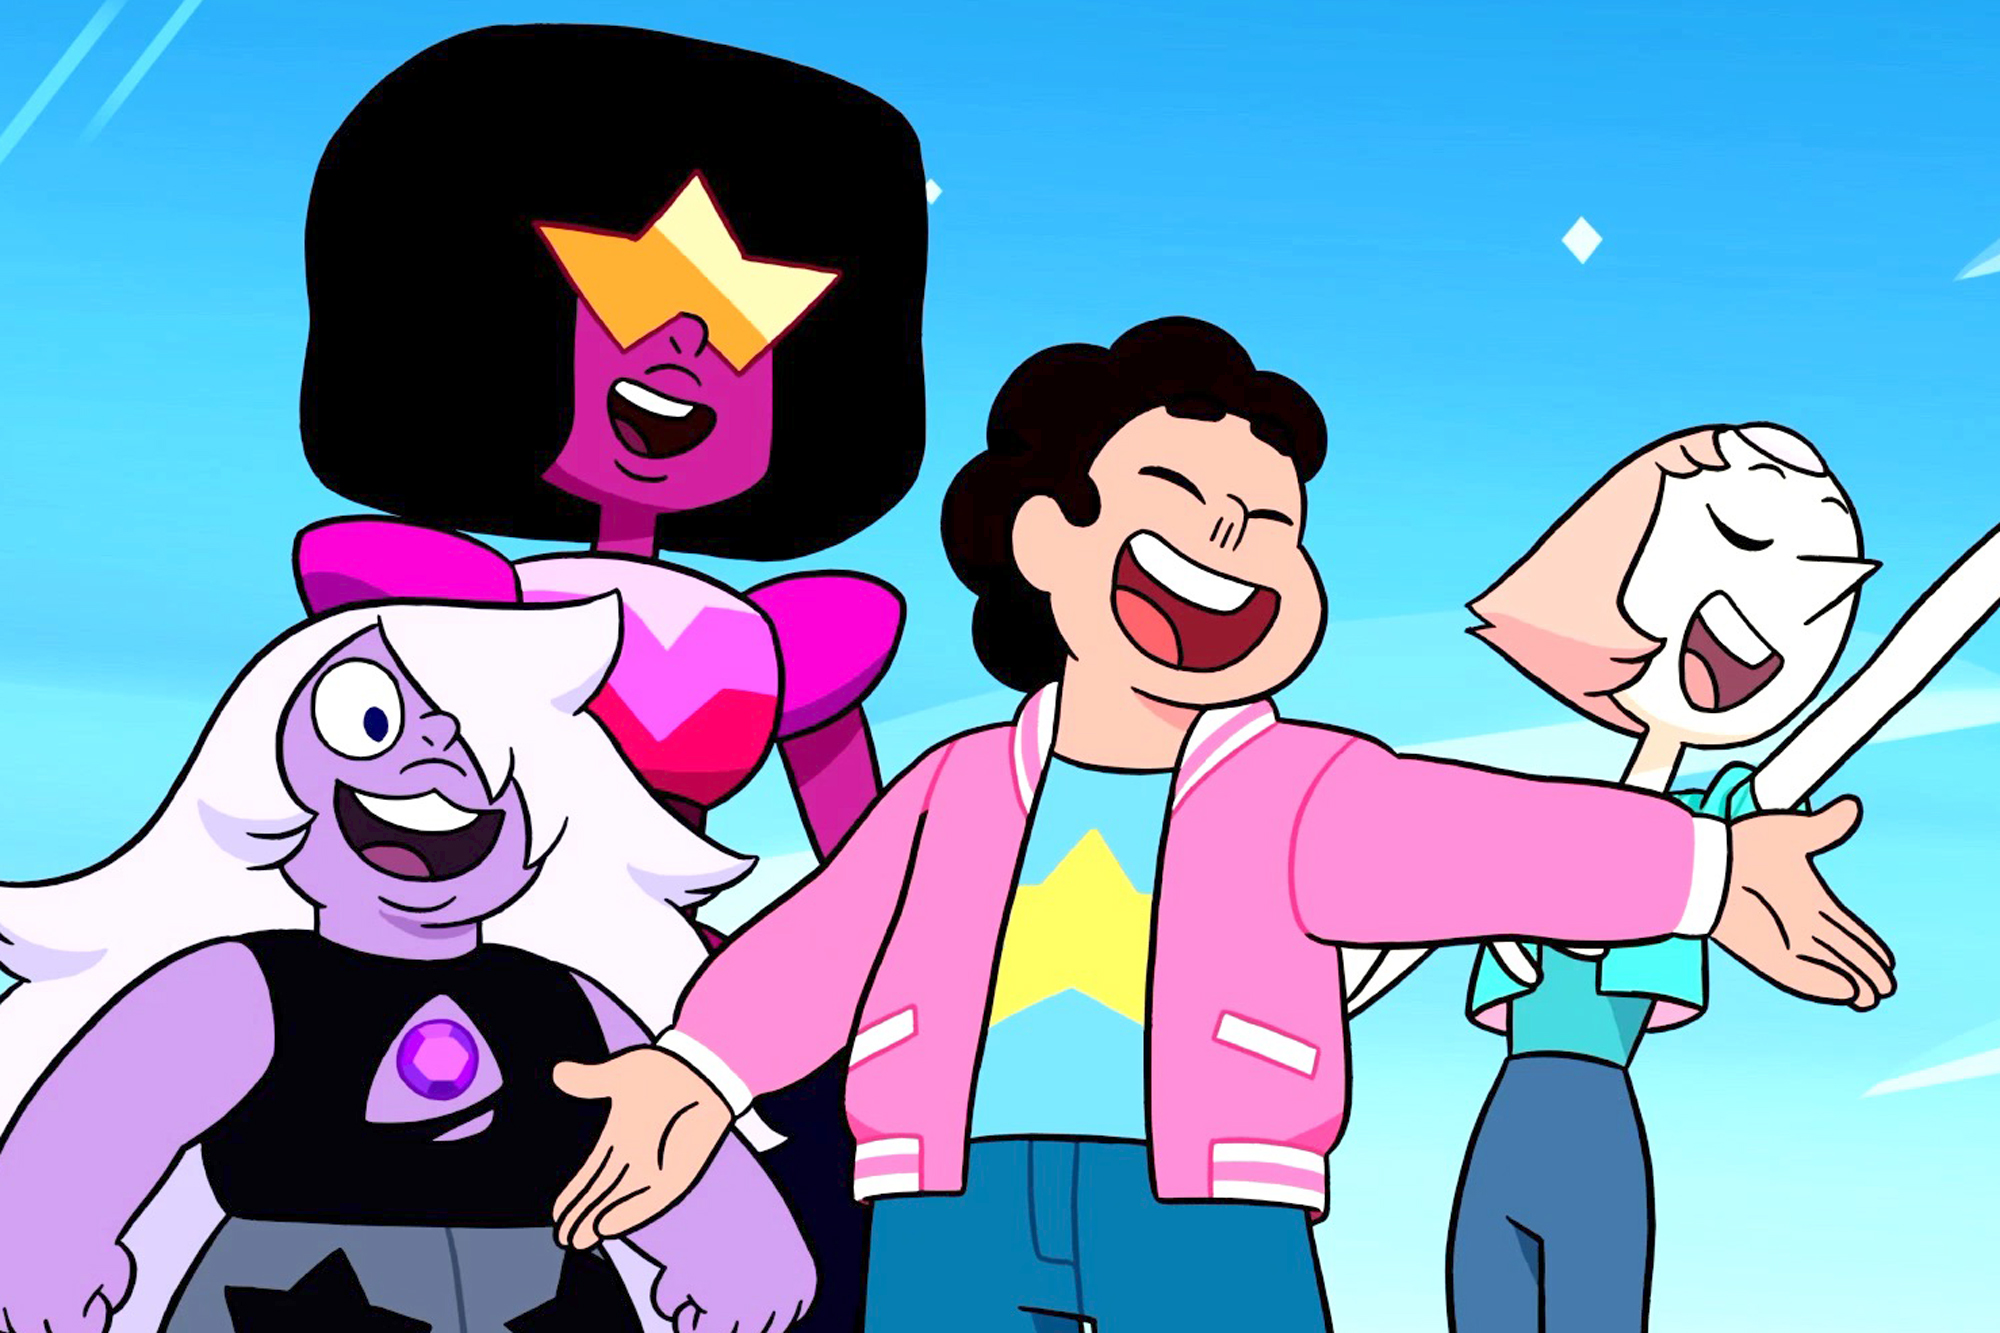 Steven Universe and The Crystal Gems on another exciting adventure together. 